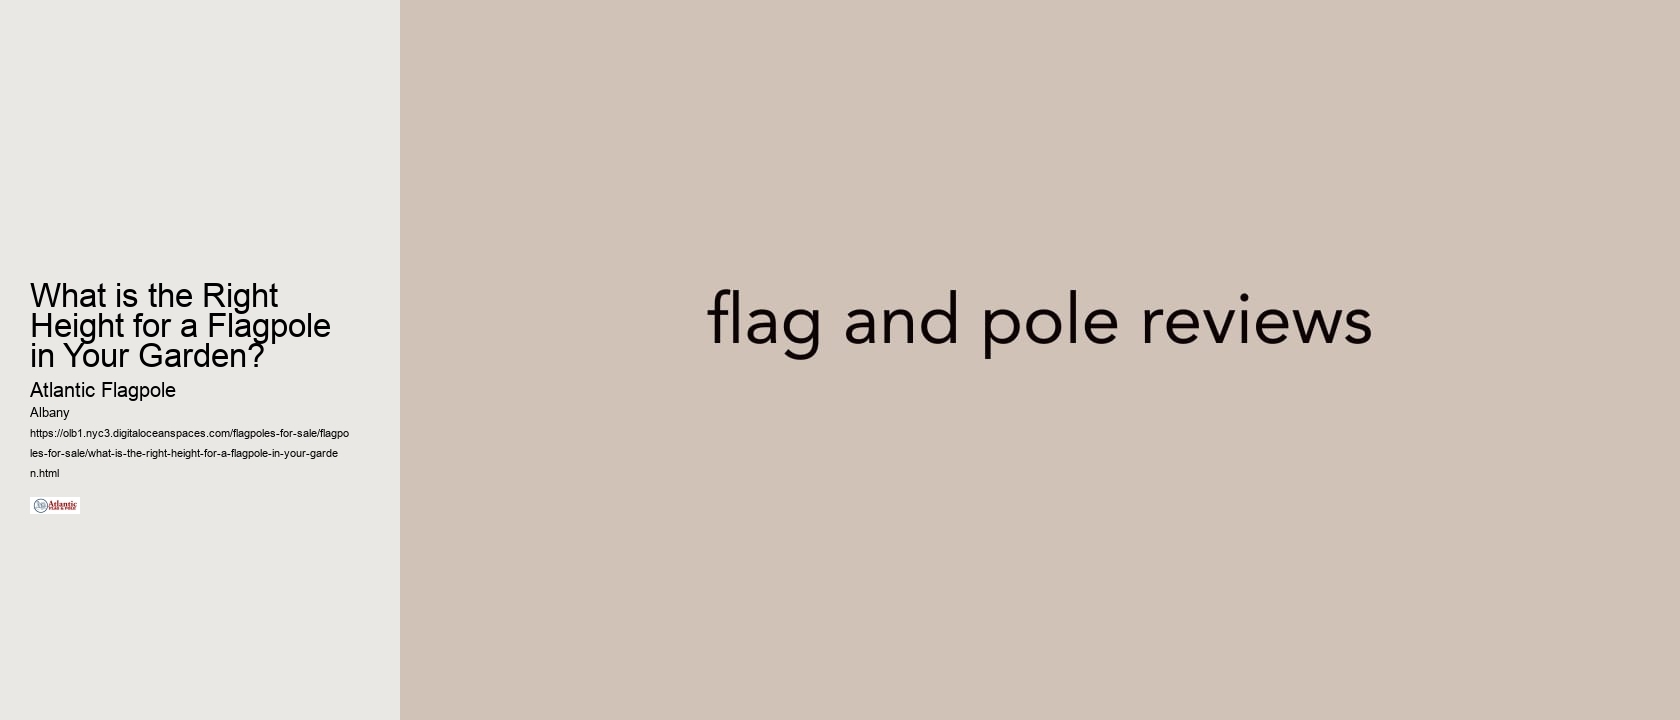 What is the Right Height for a Flagpole in Your Garden?